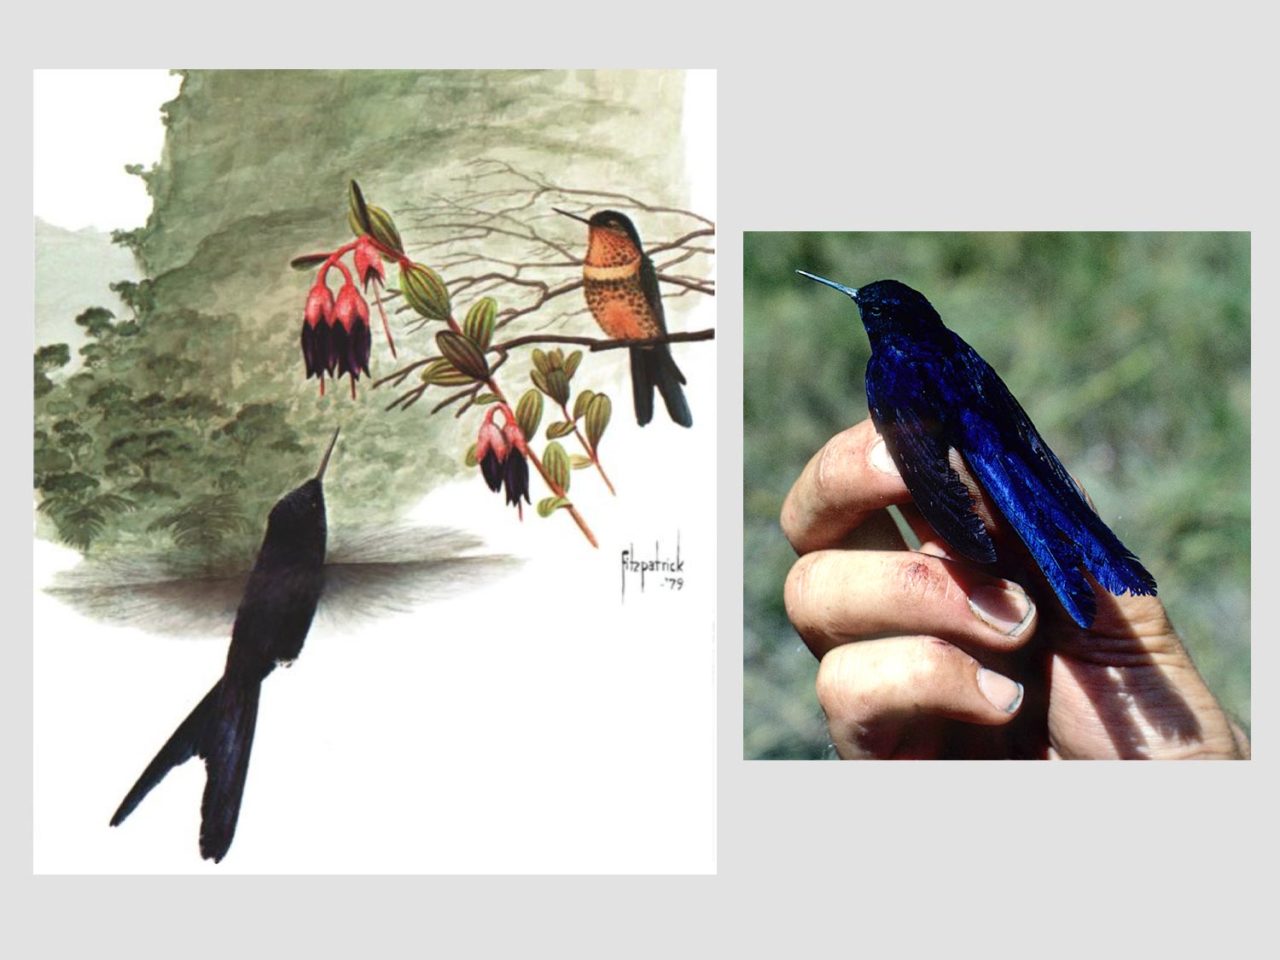 artwork of large blue-black hummingbird, painted by John Fitzpatrick, next to photo of same species